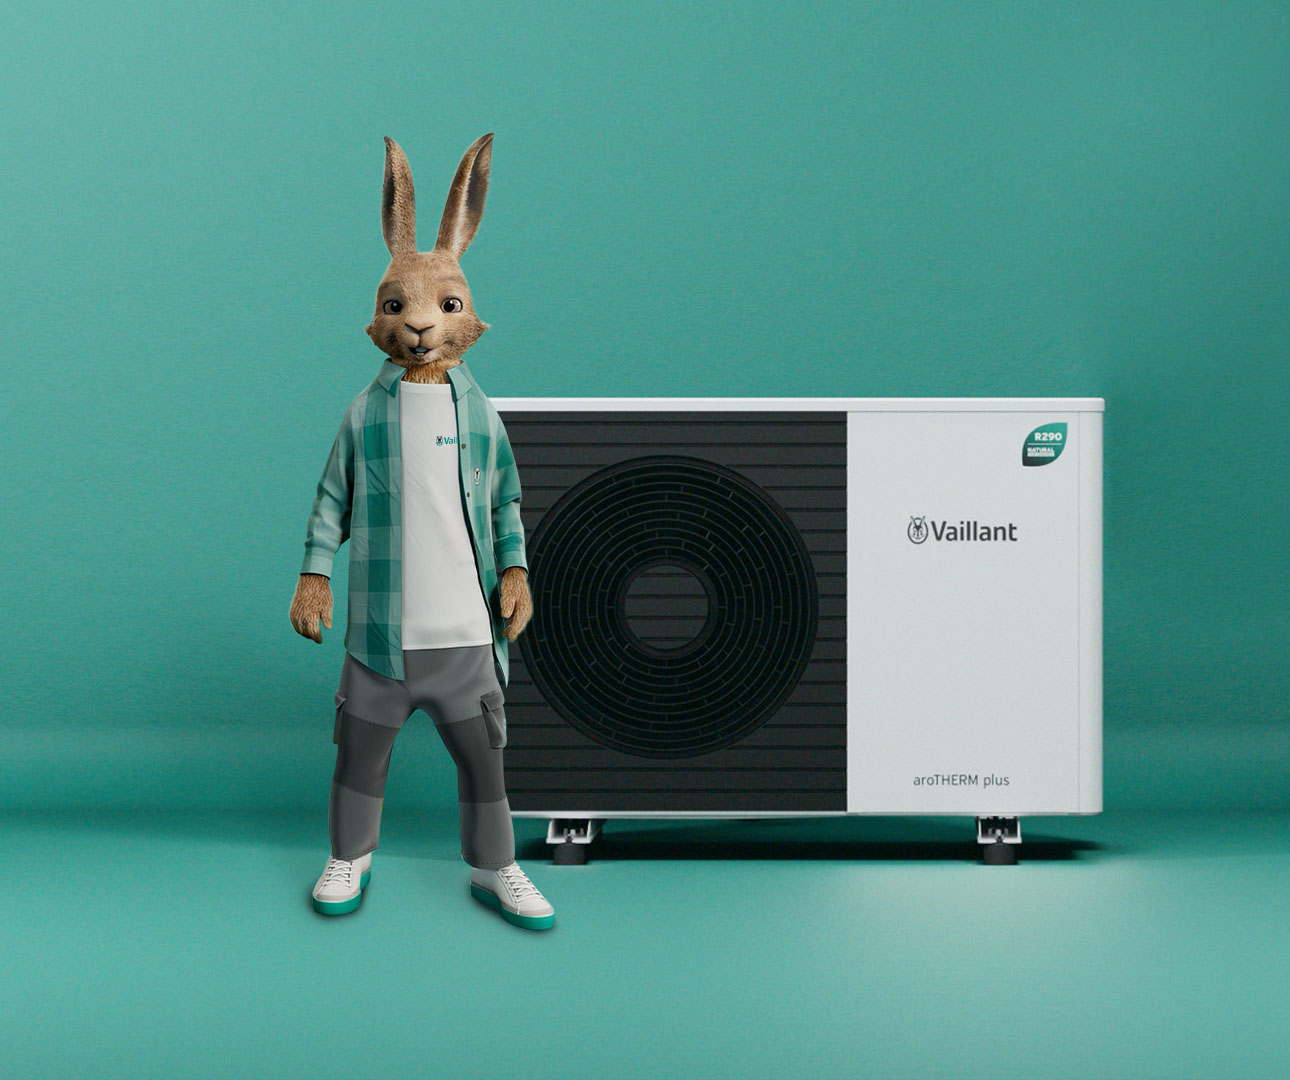 The Vaillant hare next to an aroTHERM plus heat pump on a green background